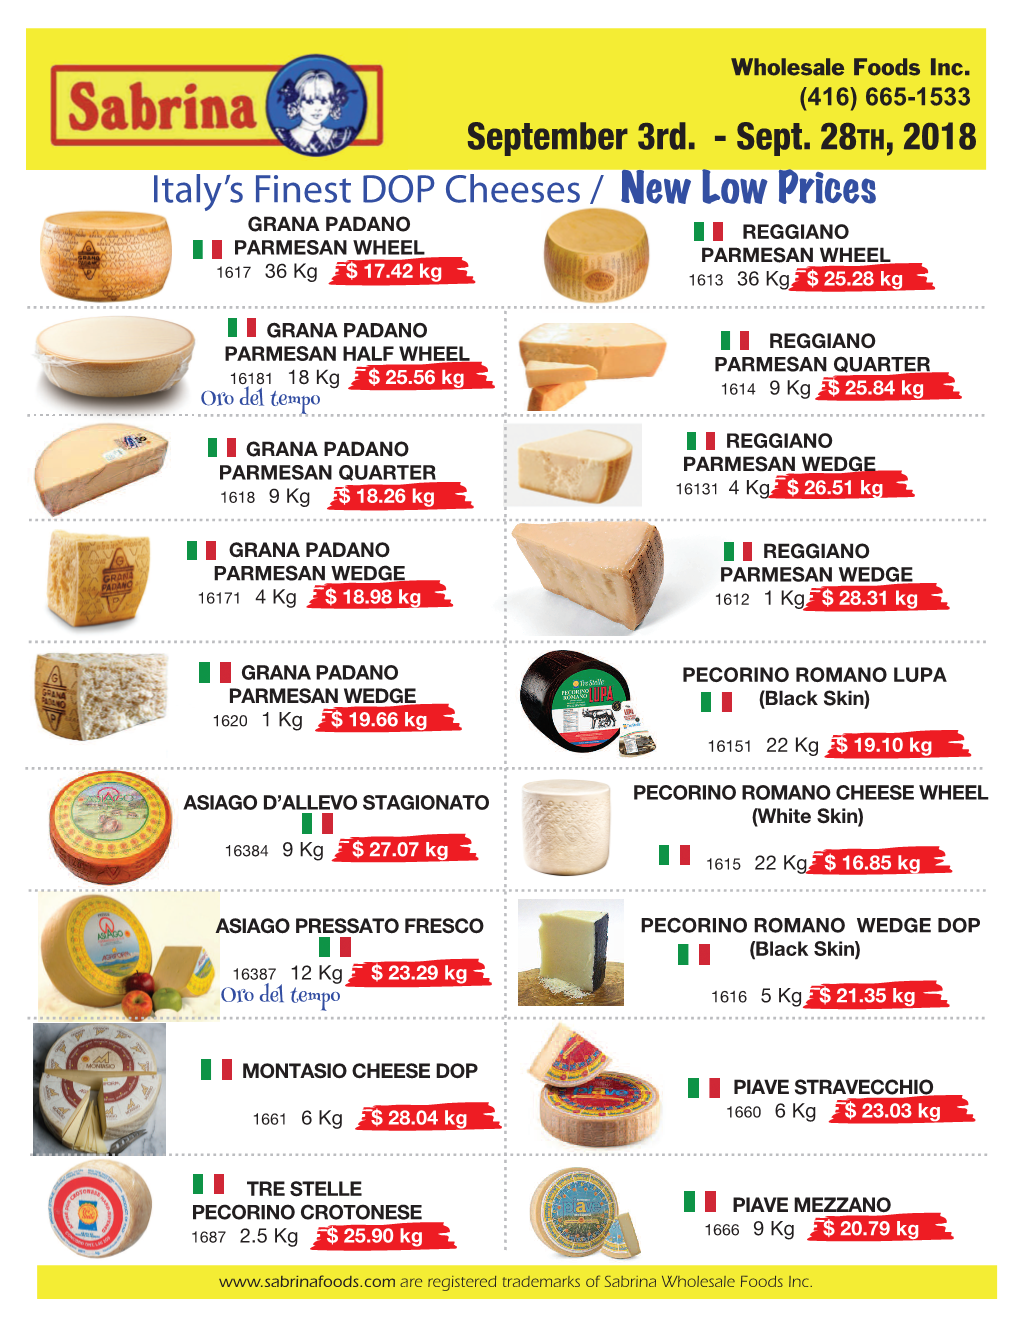 Italy's Finest DOP Cheeses / New Low Prices